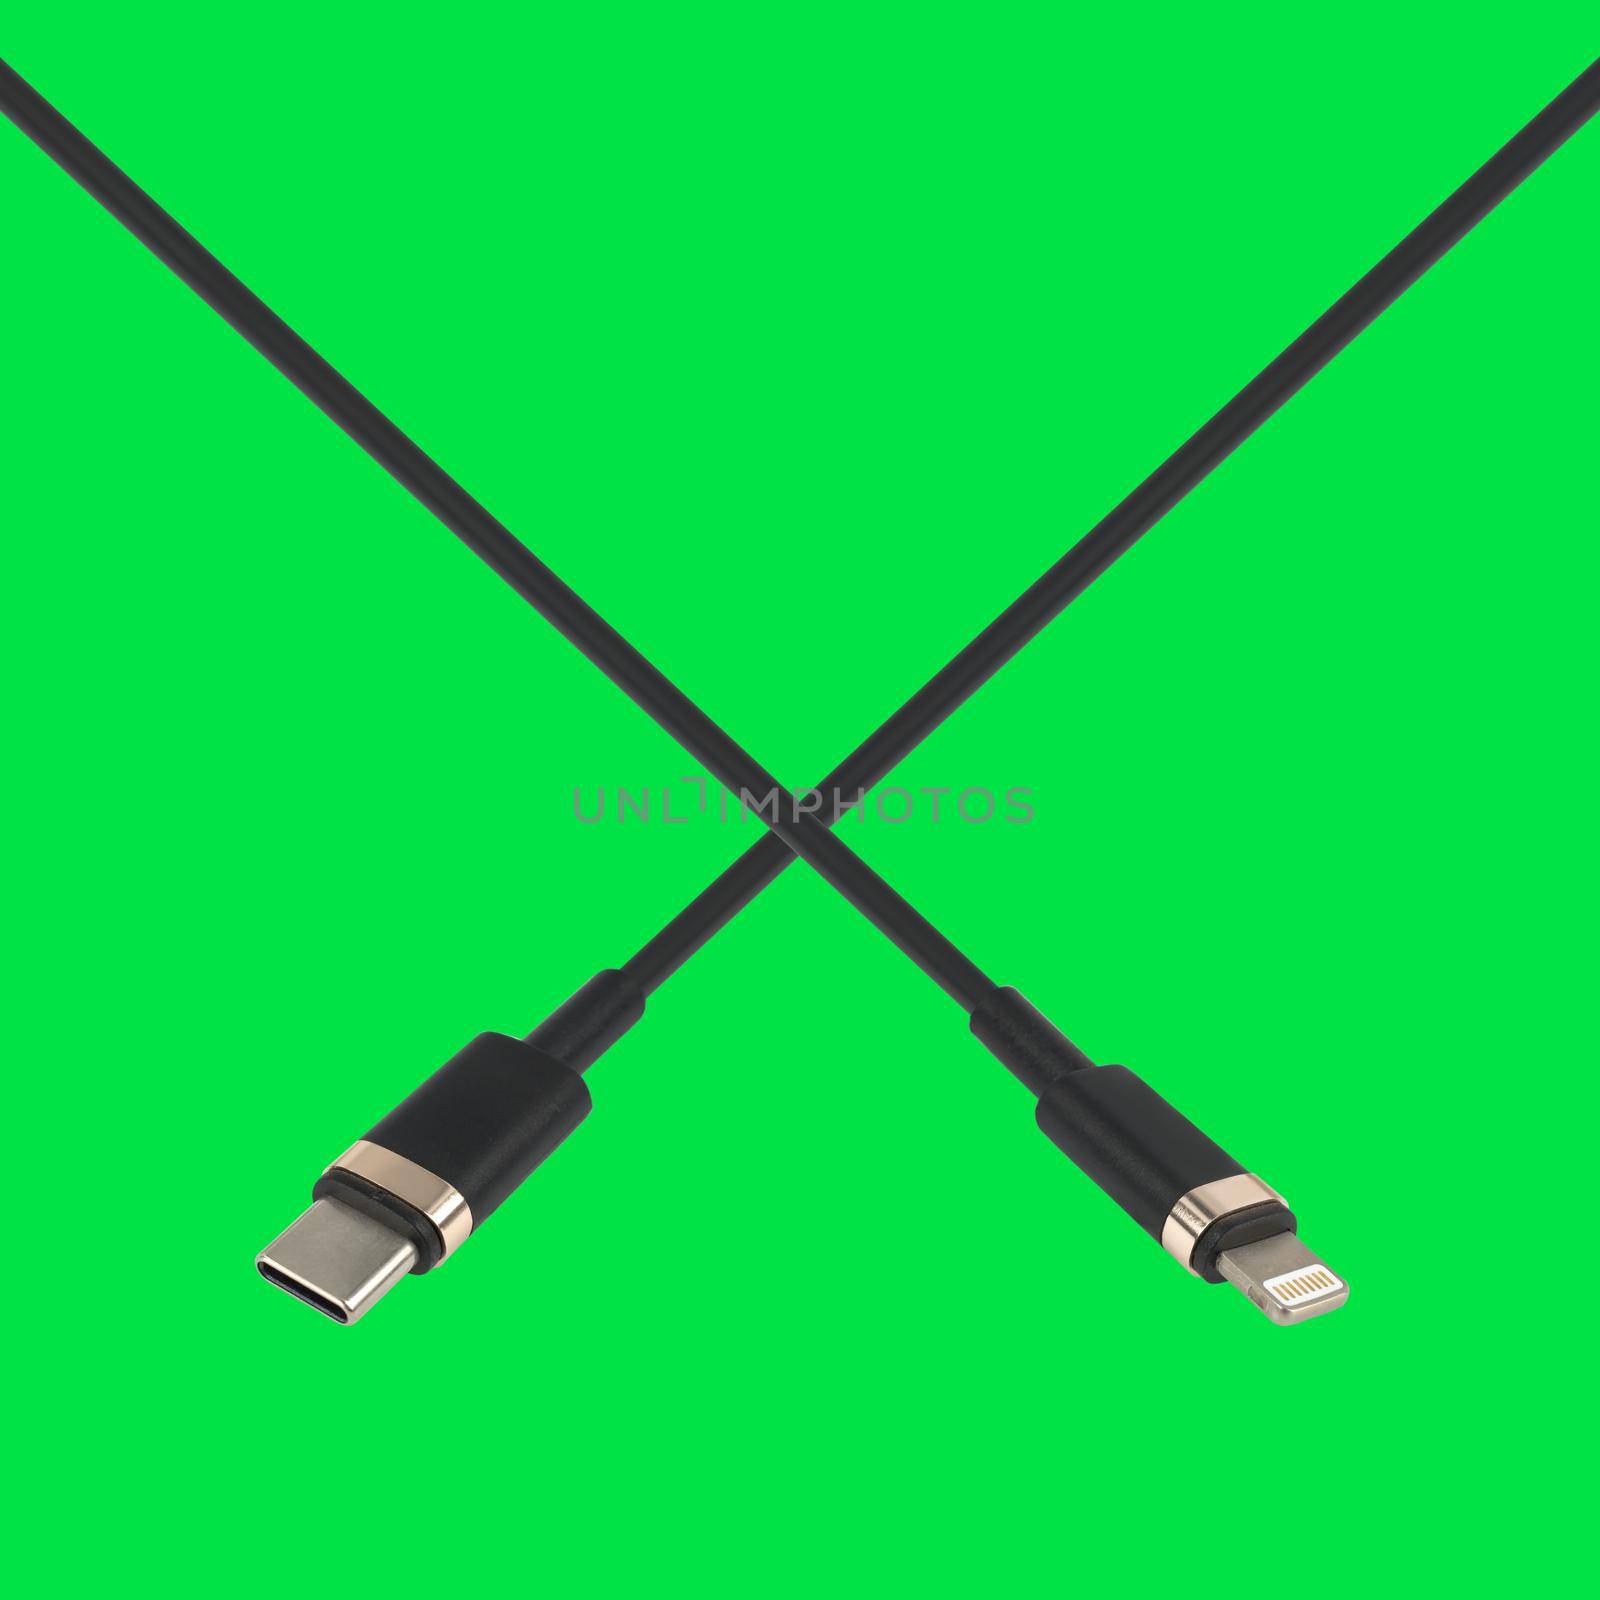 cable with Type-C connector and Lightning, on a green background in isolation